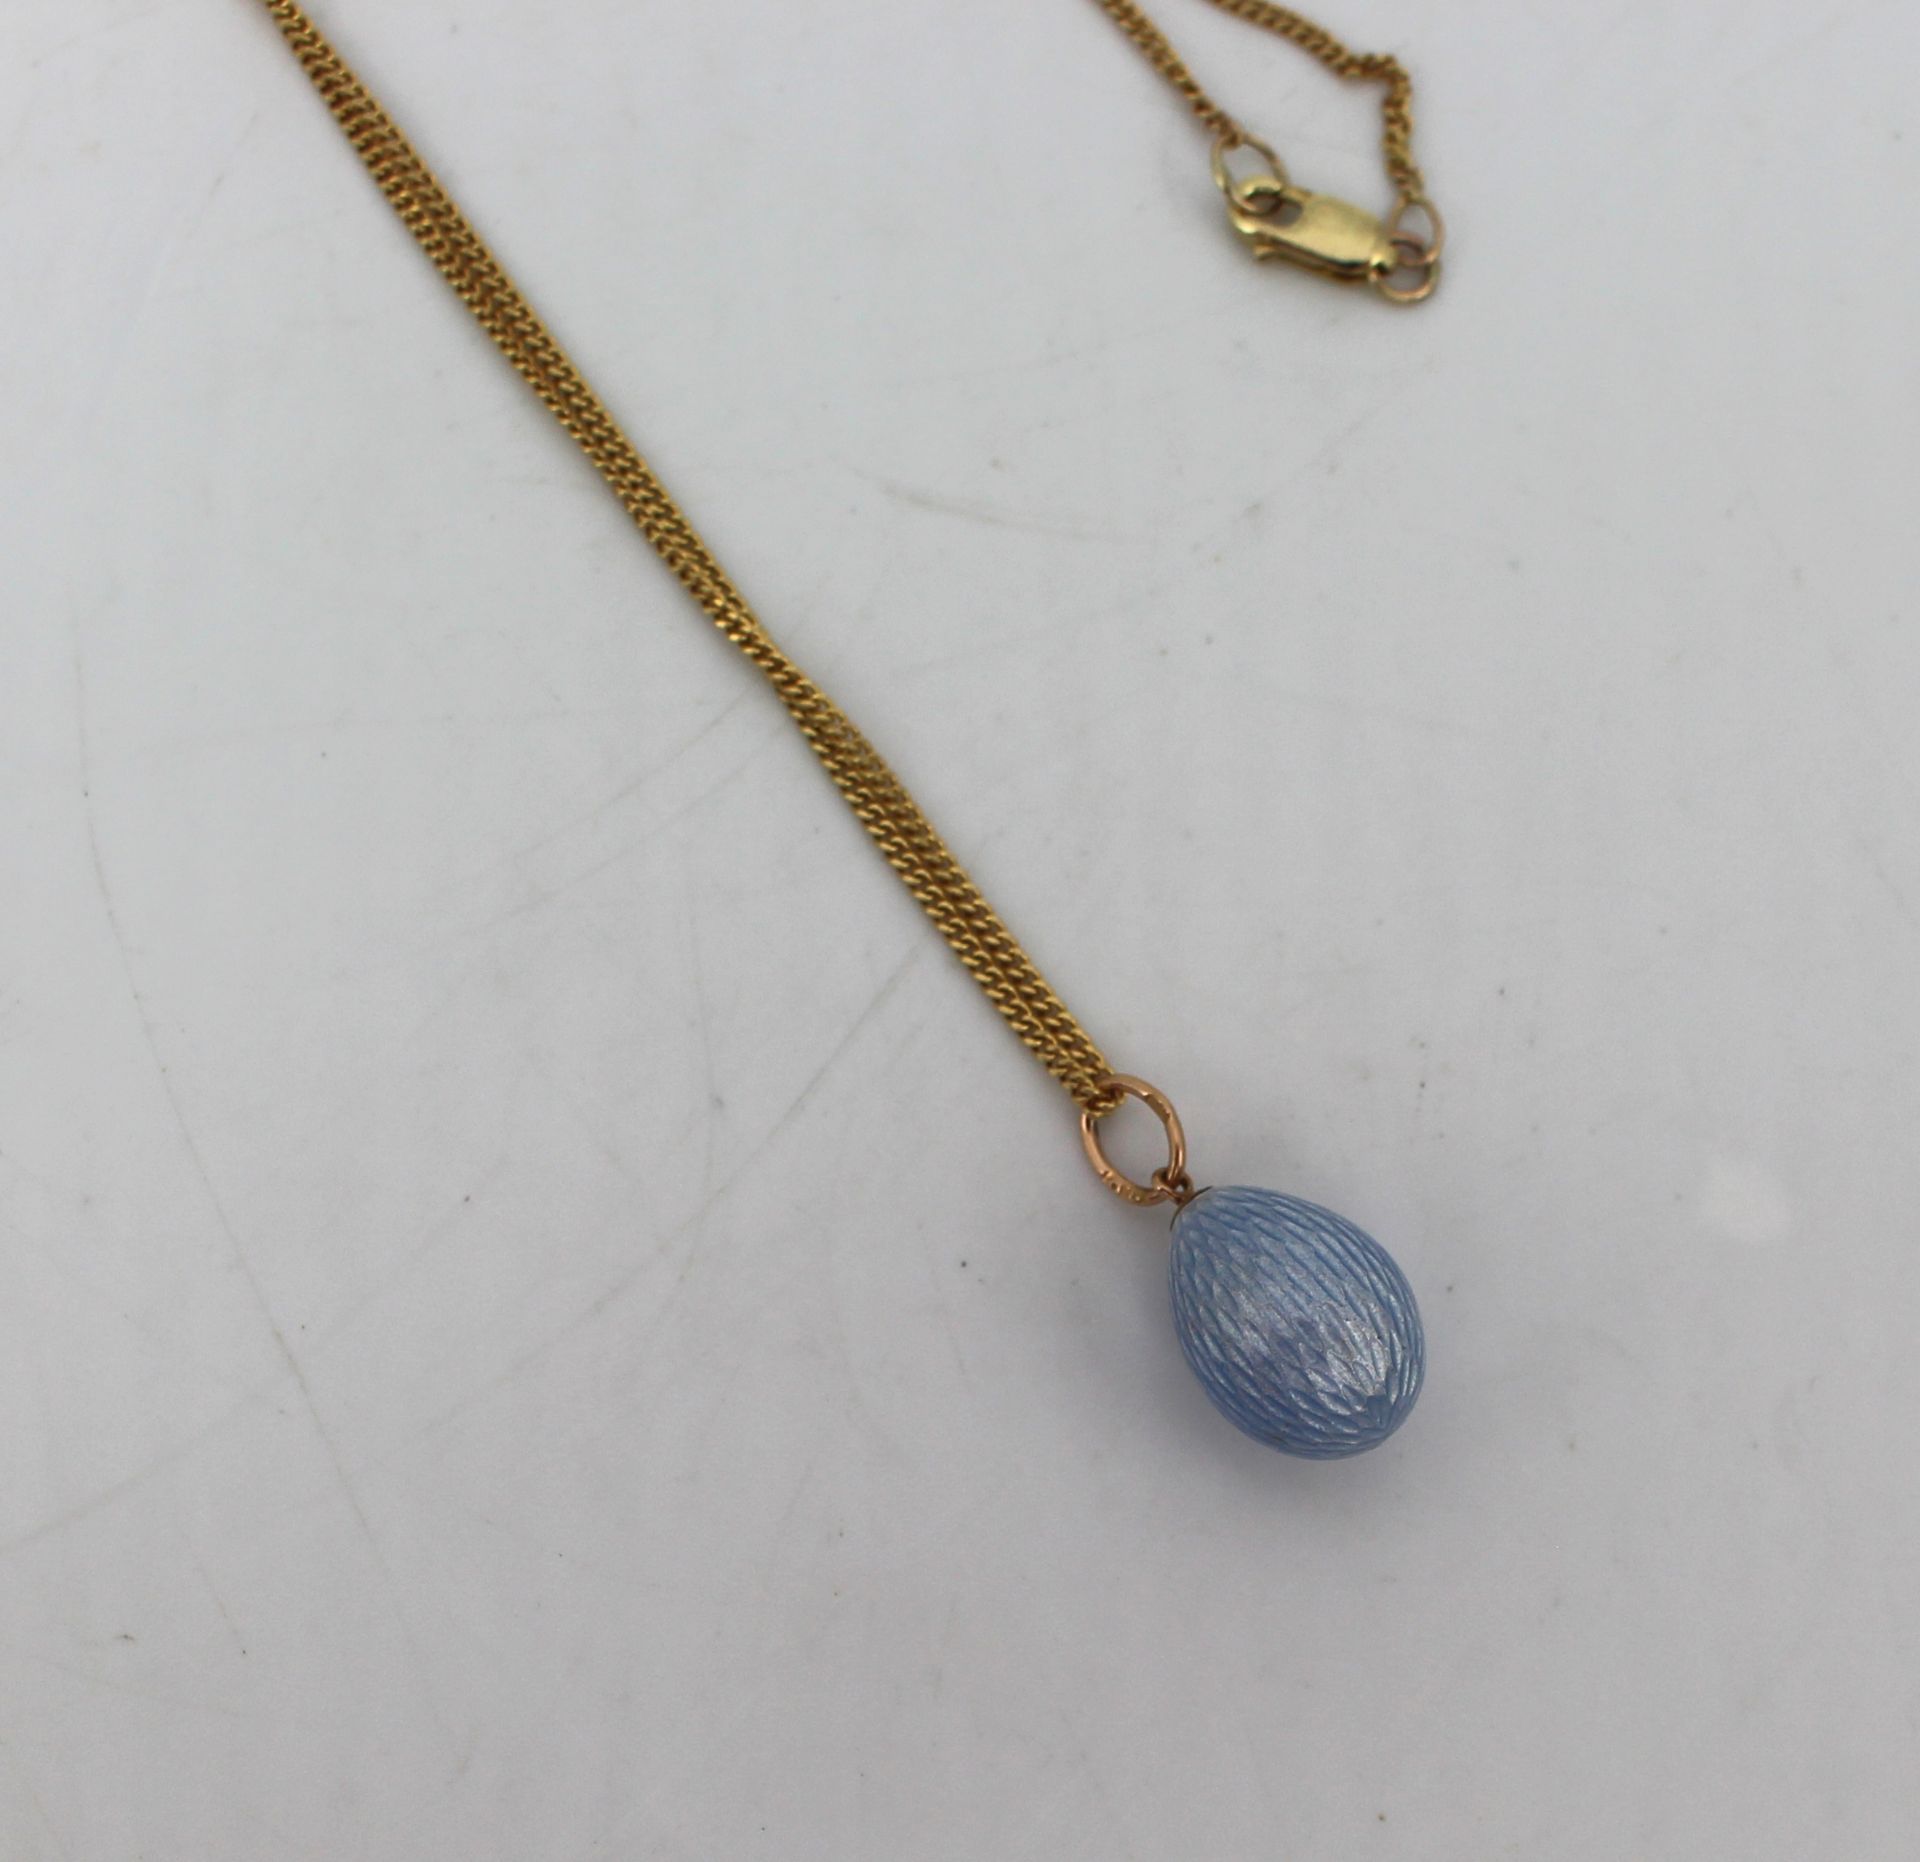 Russian Blue Guilloche Enamel 14ct Gold Egg Pendant on 9ct Gold Chain - Image 2 of 3